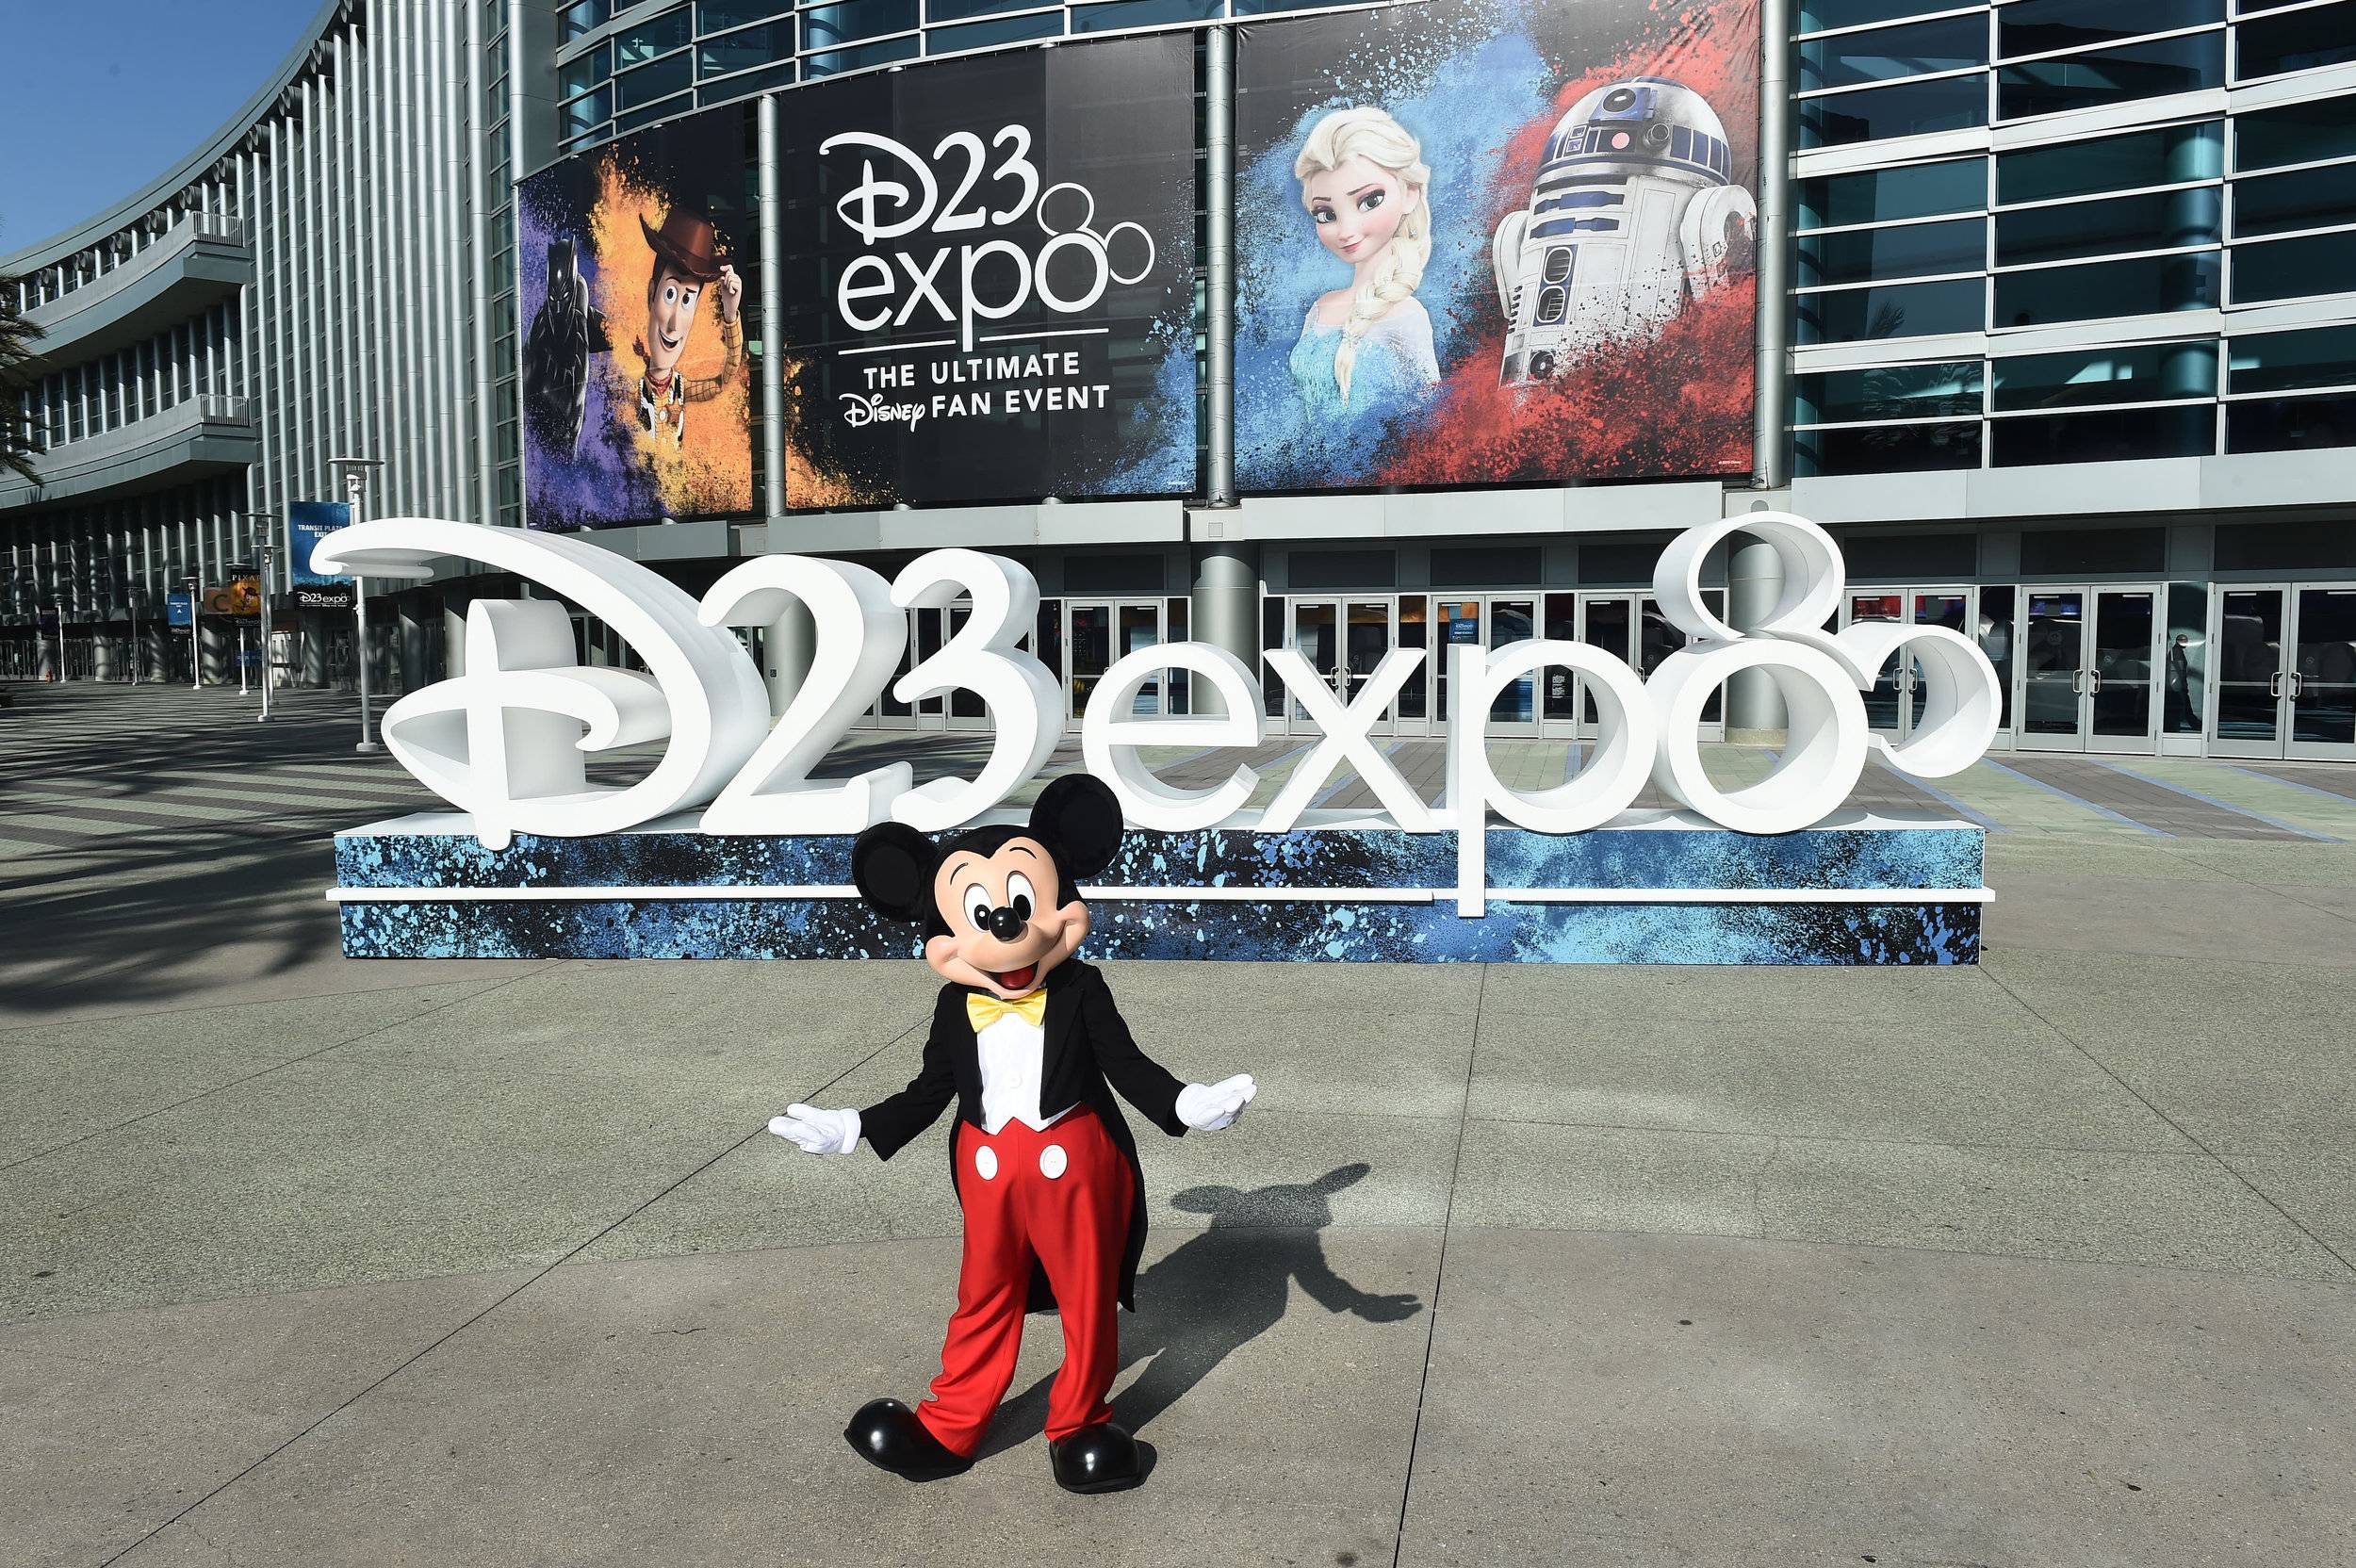 Pricing announced for the D23 Expo 2022 beginning September 9 at the  Anaheim Convention Center